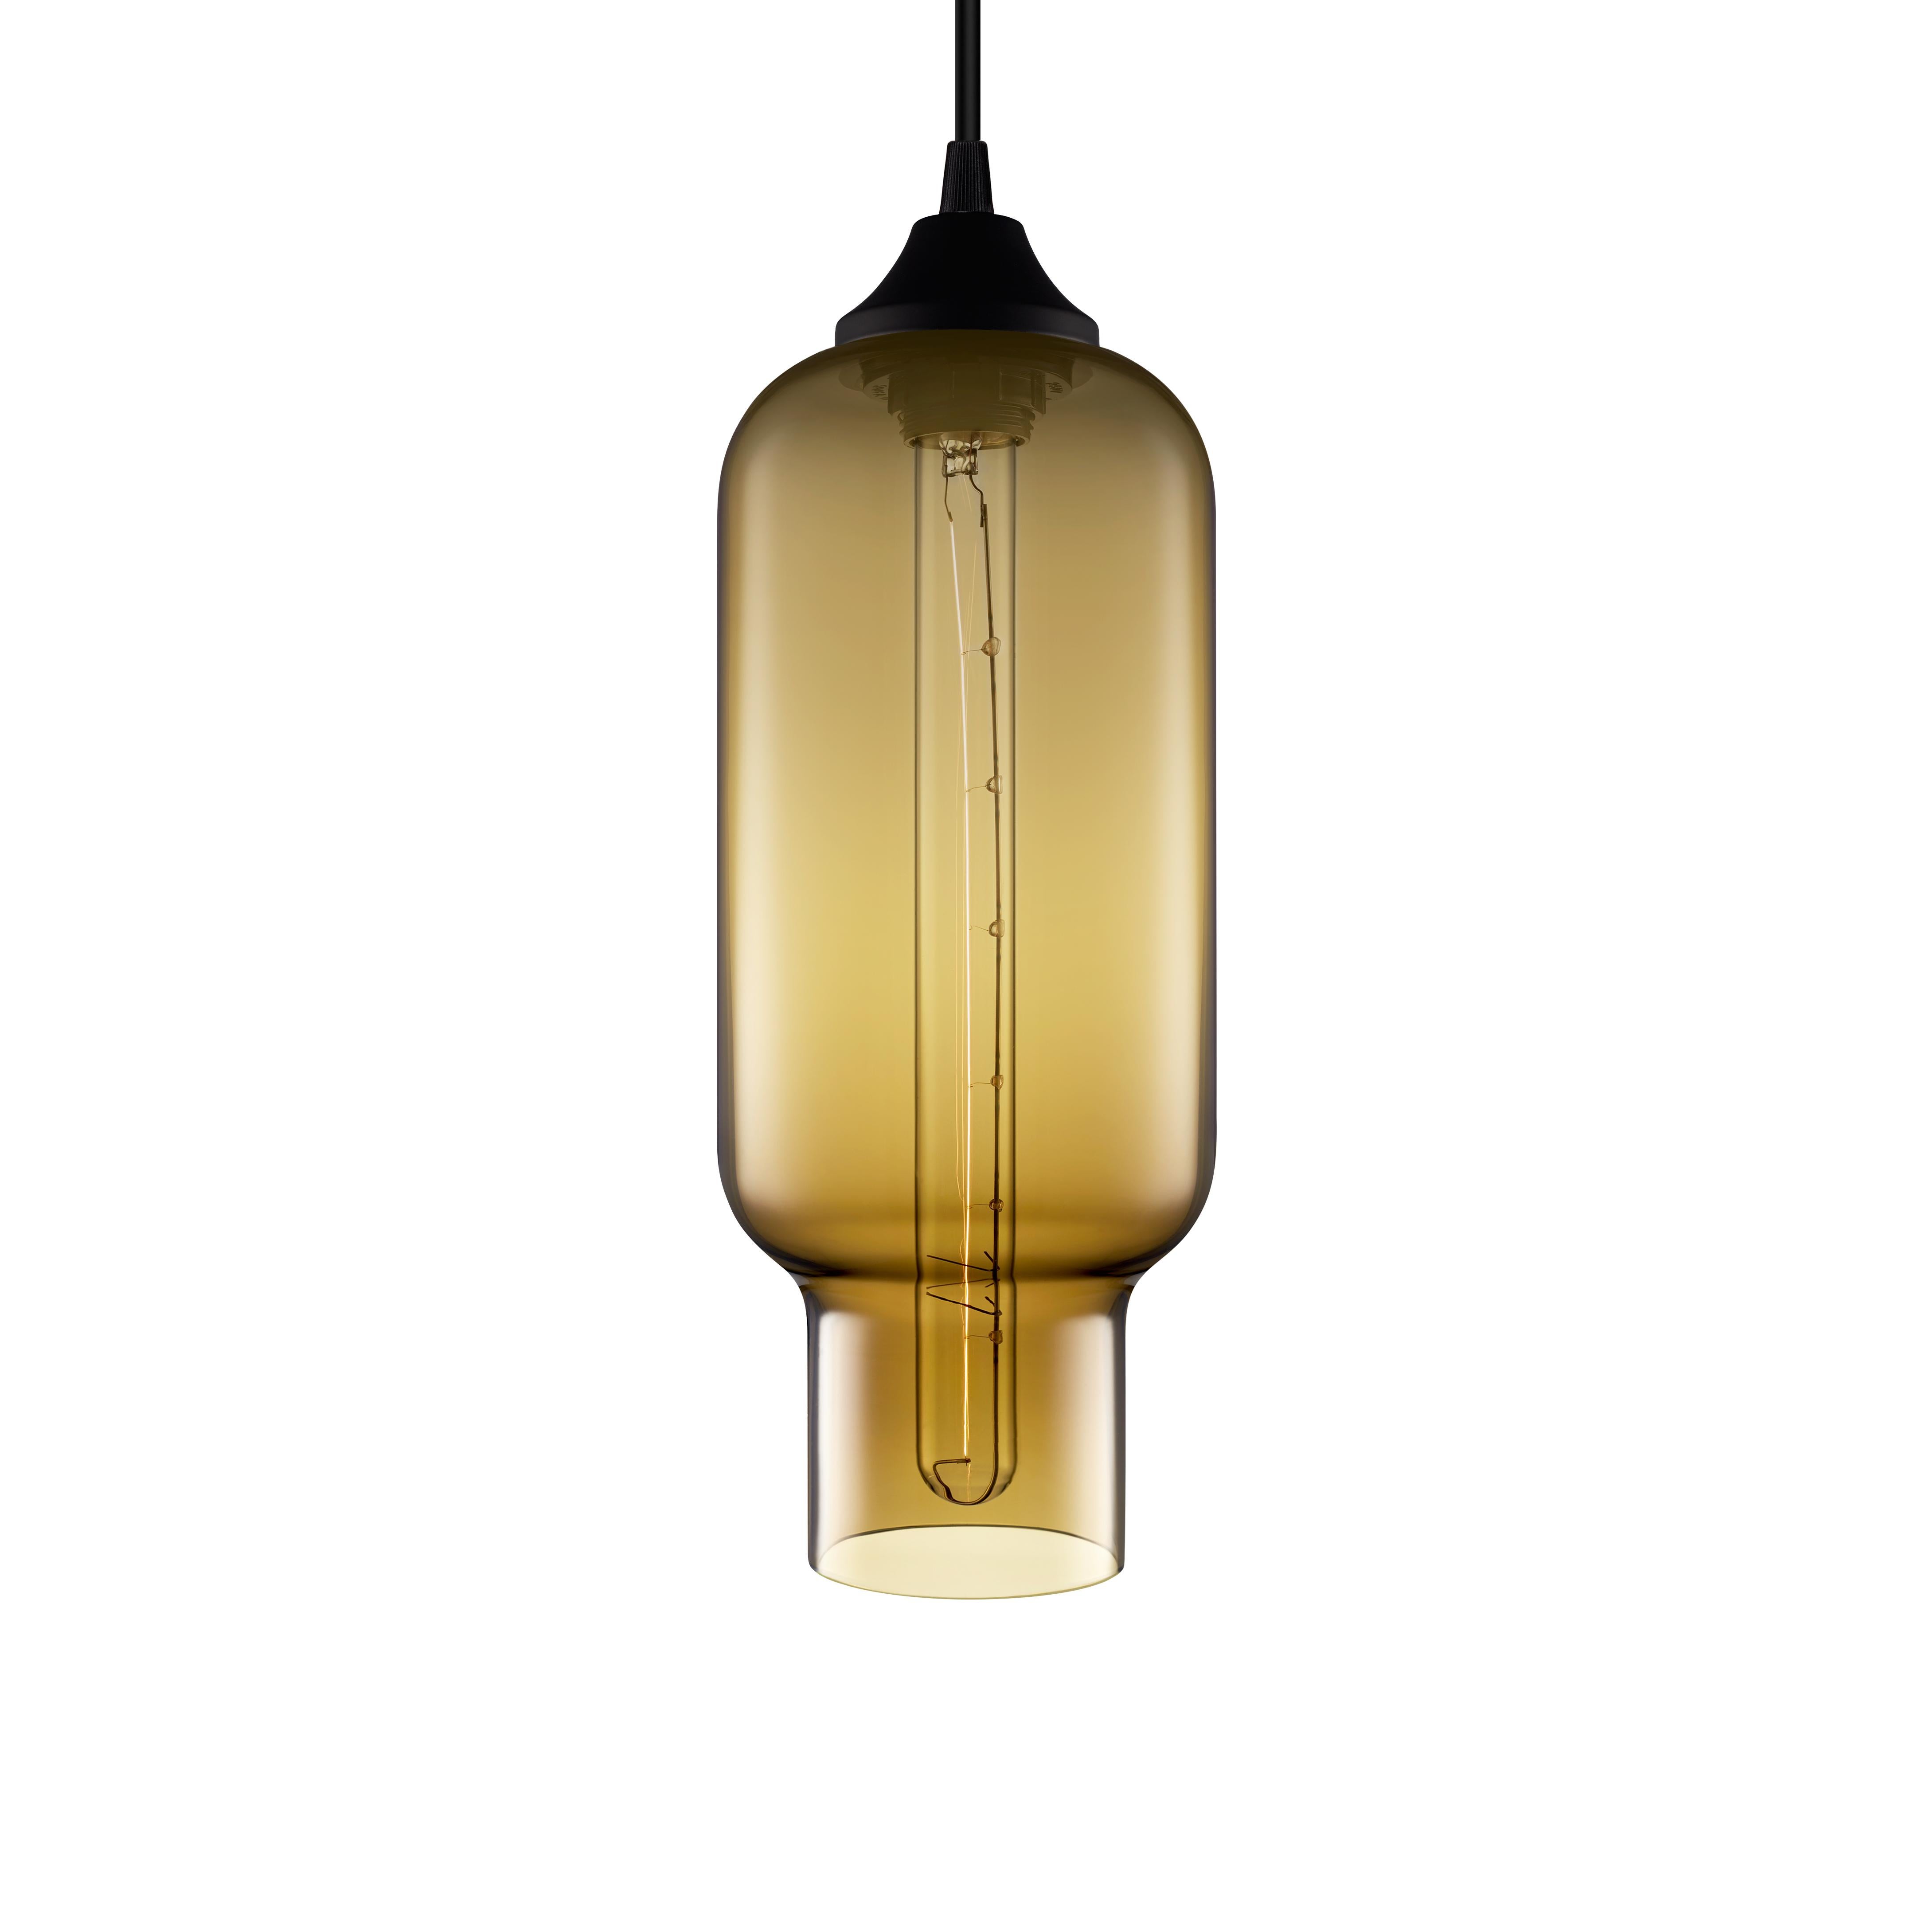 American Pharos Crystal Handblown Modern Glass Pendant Light, Made in the USA For Sale